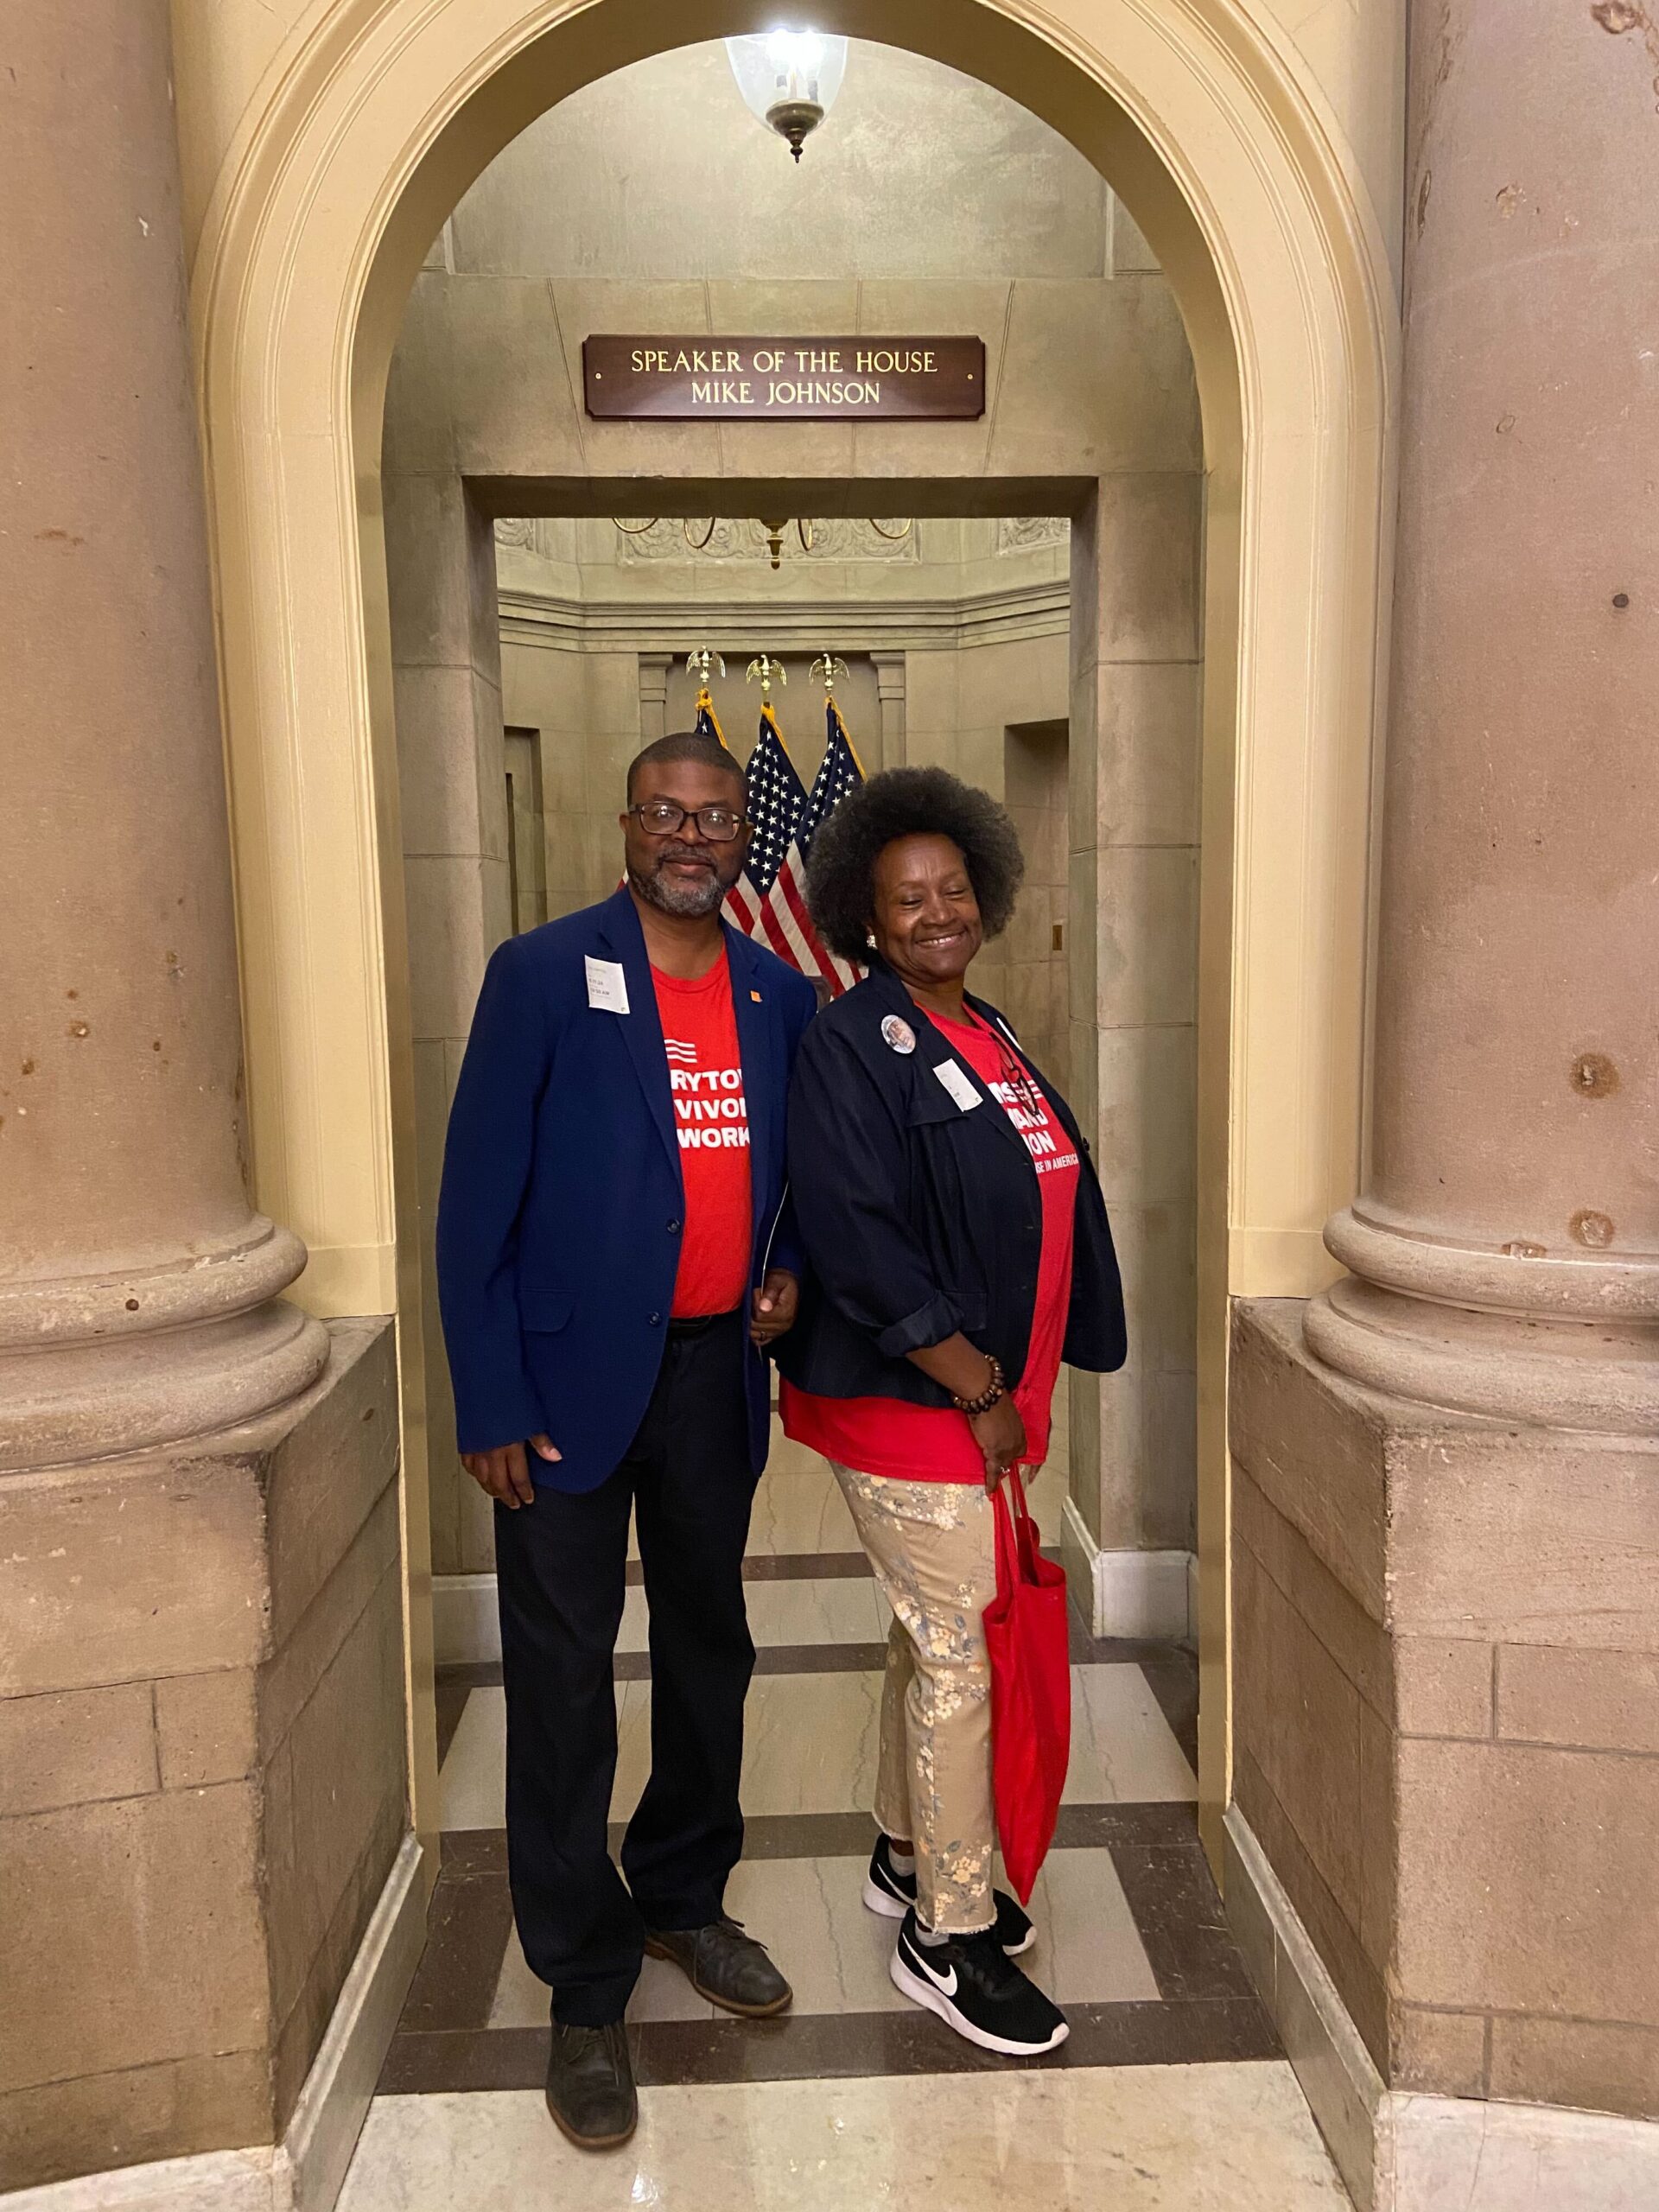 Two volunteers from Louisiana pose in front of Speaker of the House Mike Johnson's office in the D.C. Capitol. Both volunteers—a man on the right, and a woman on the left—are Black; they both wear red branded shirts and dark jackets overtop of the tees.